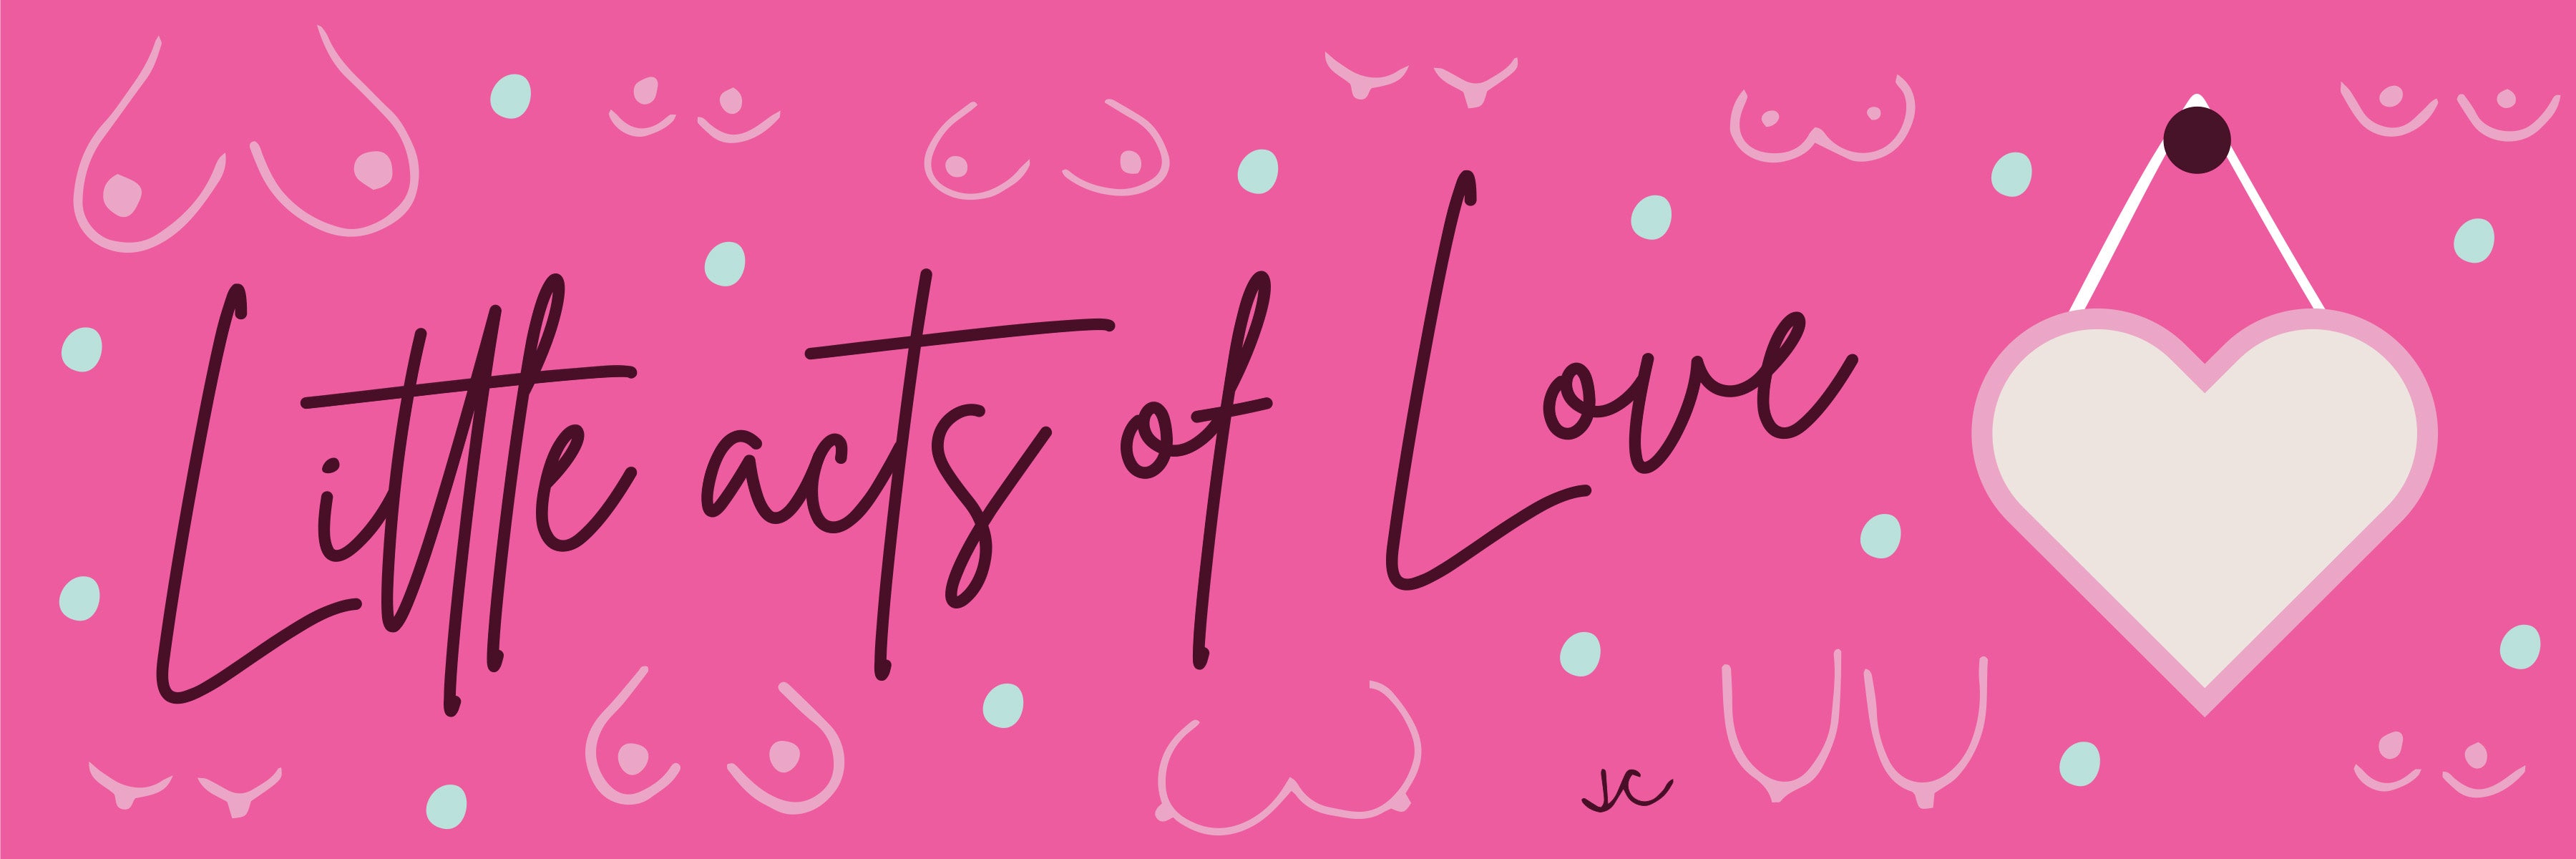 10 Meaningful and Creative Ways to Show Love to Your Partner - Little Acts of Love - Titty City Design - Let's Talk Titties Blog - Full